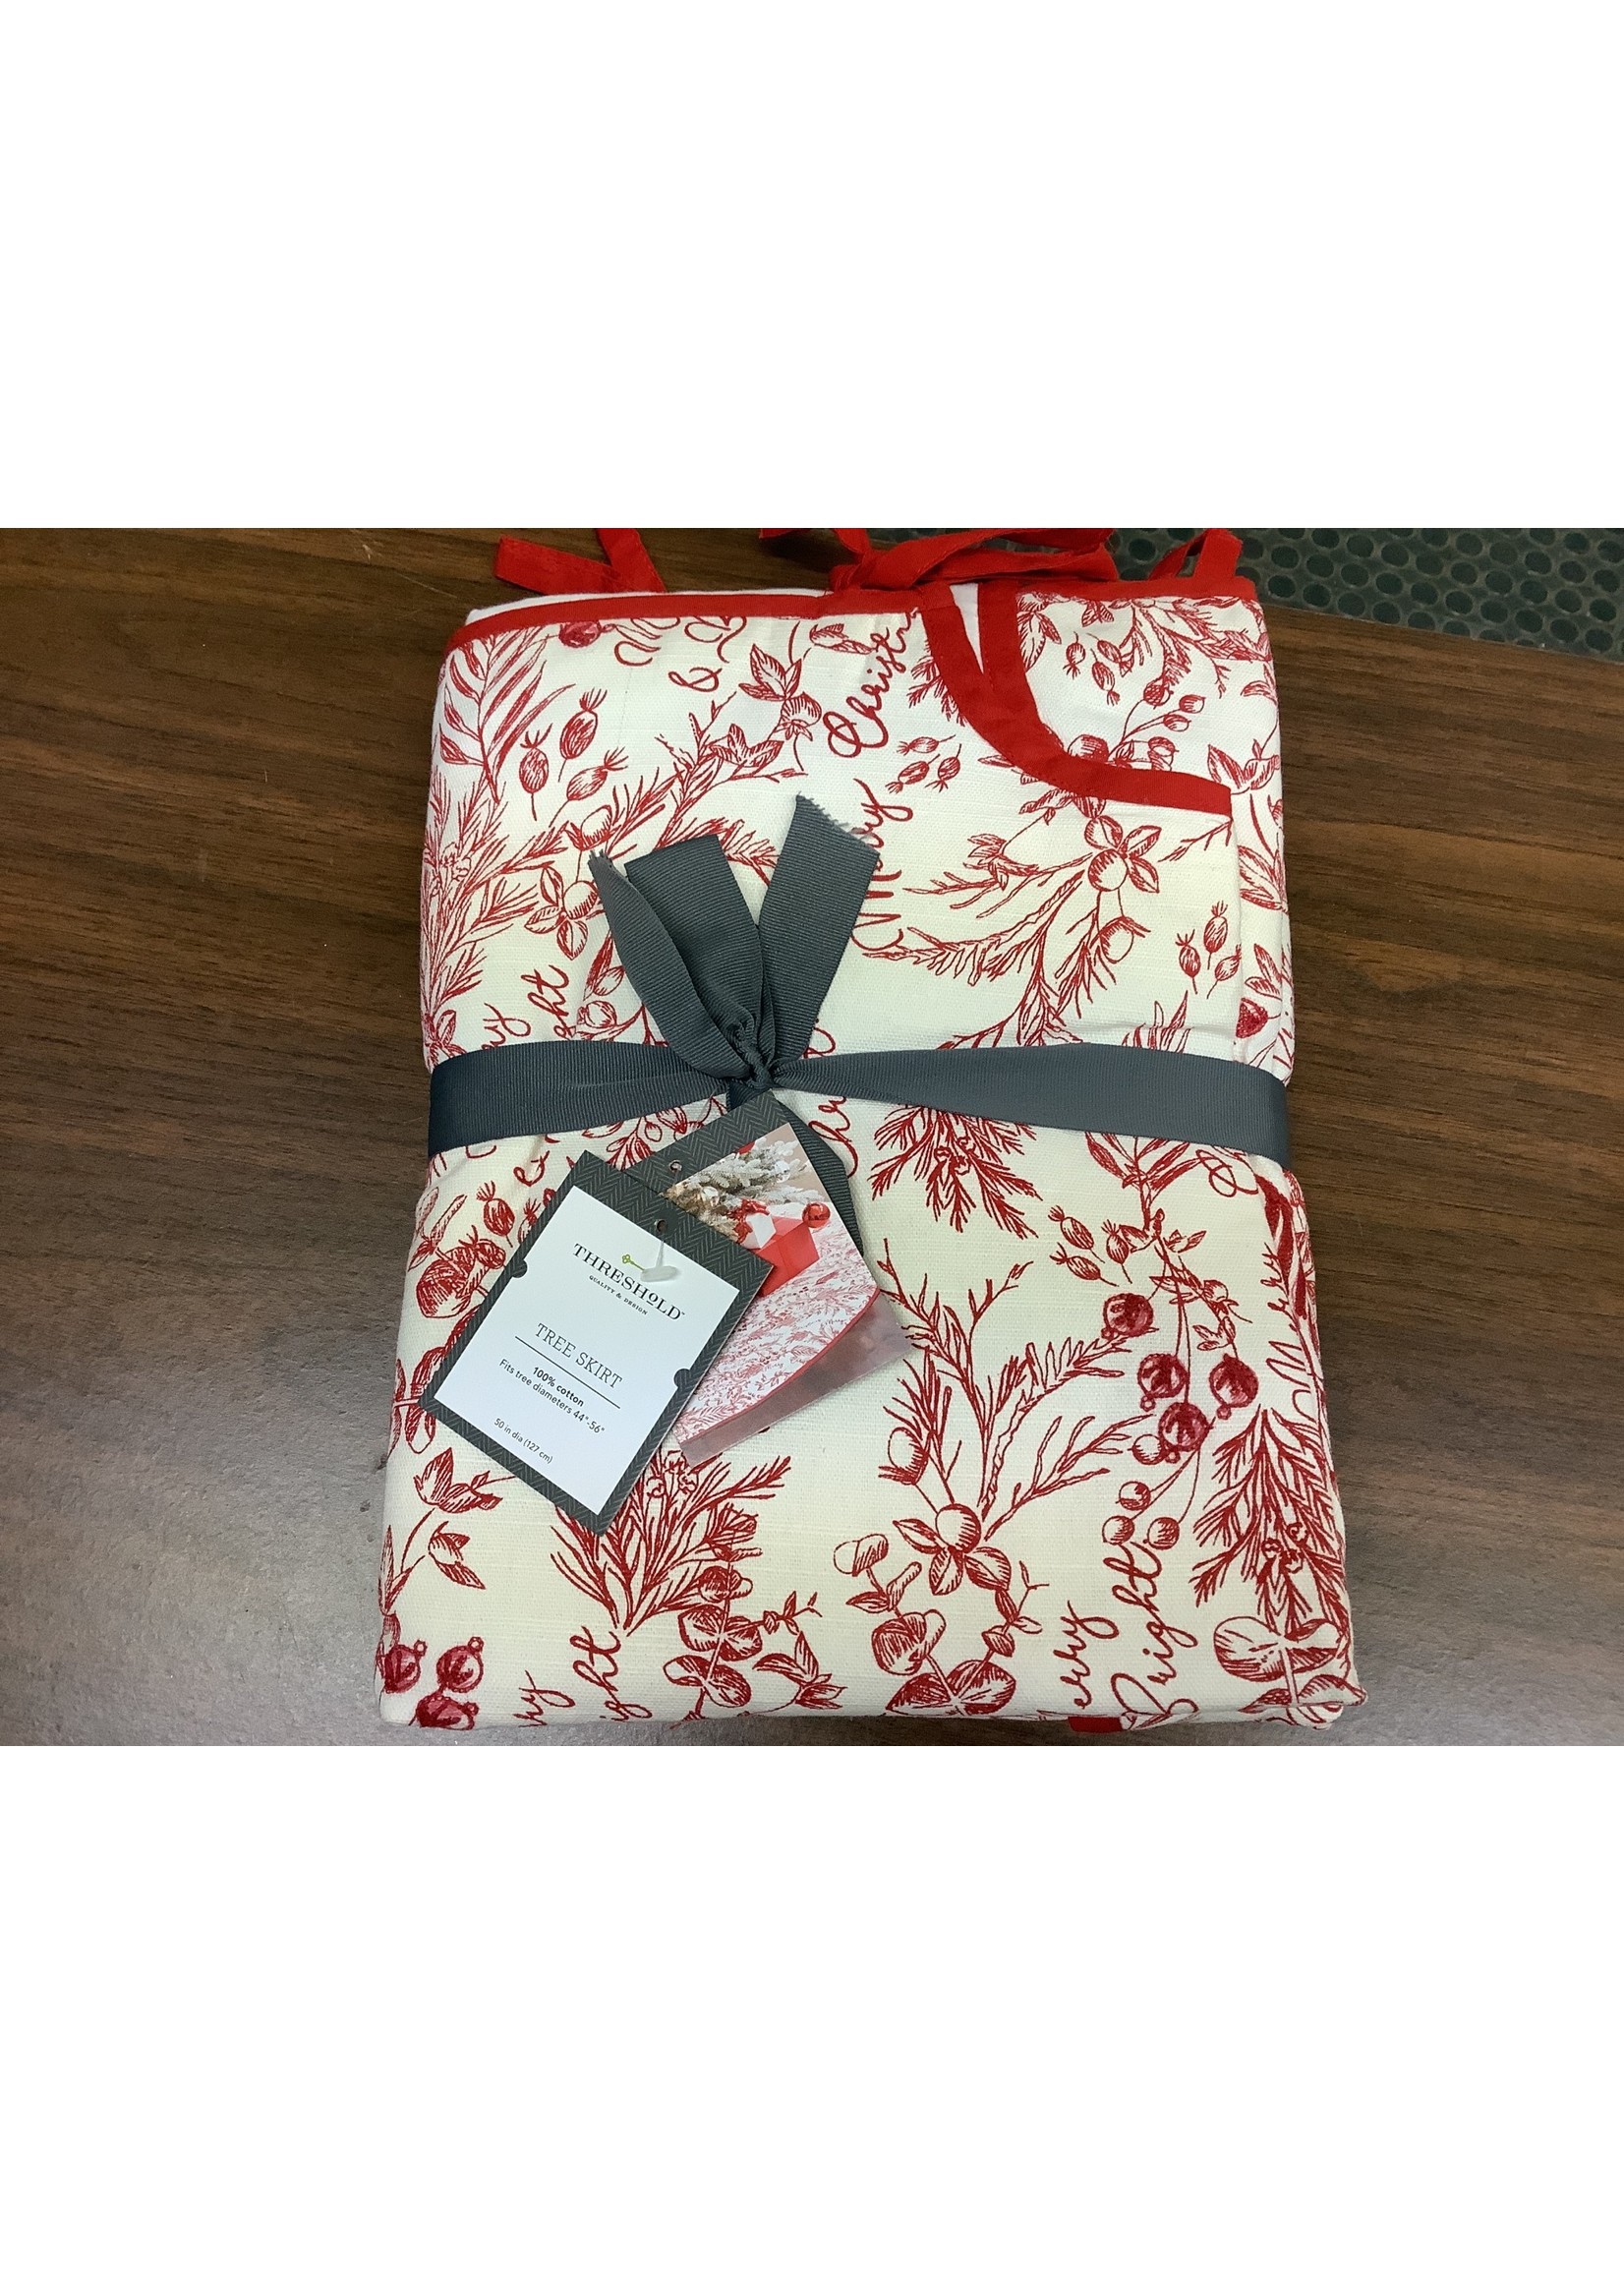 Red & White Floral Printed Tree Skirt - Threshold